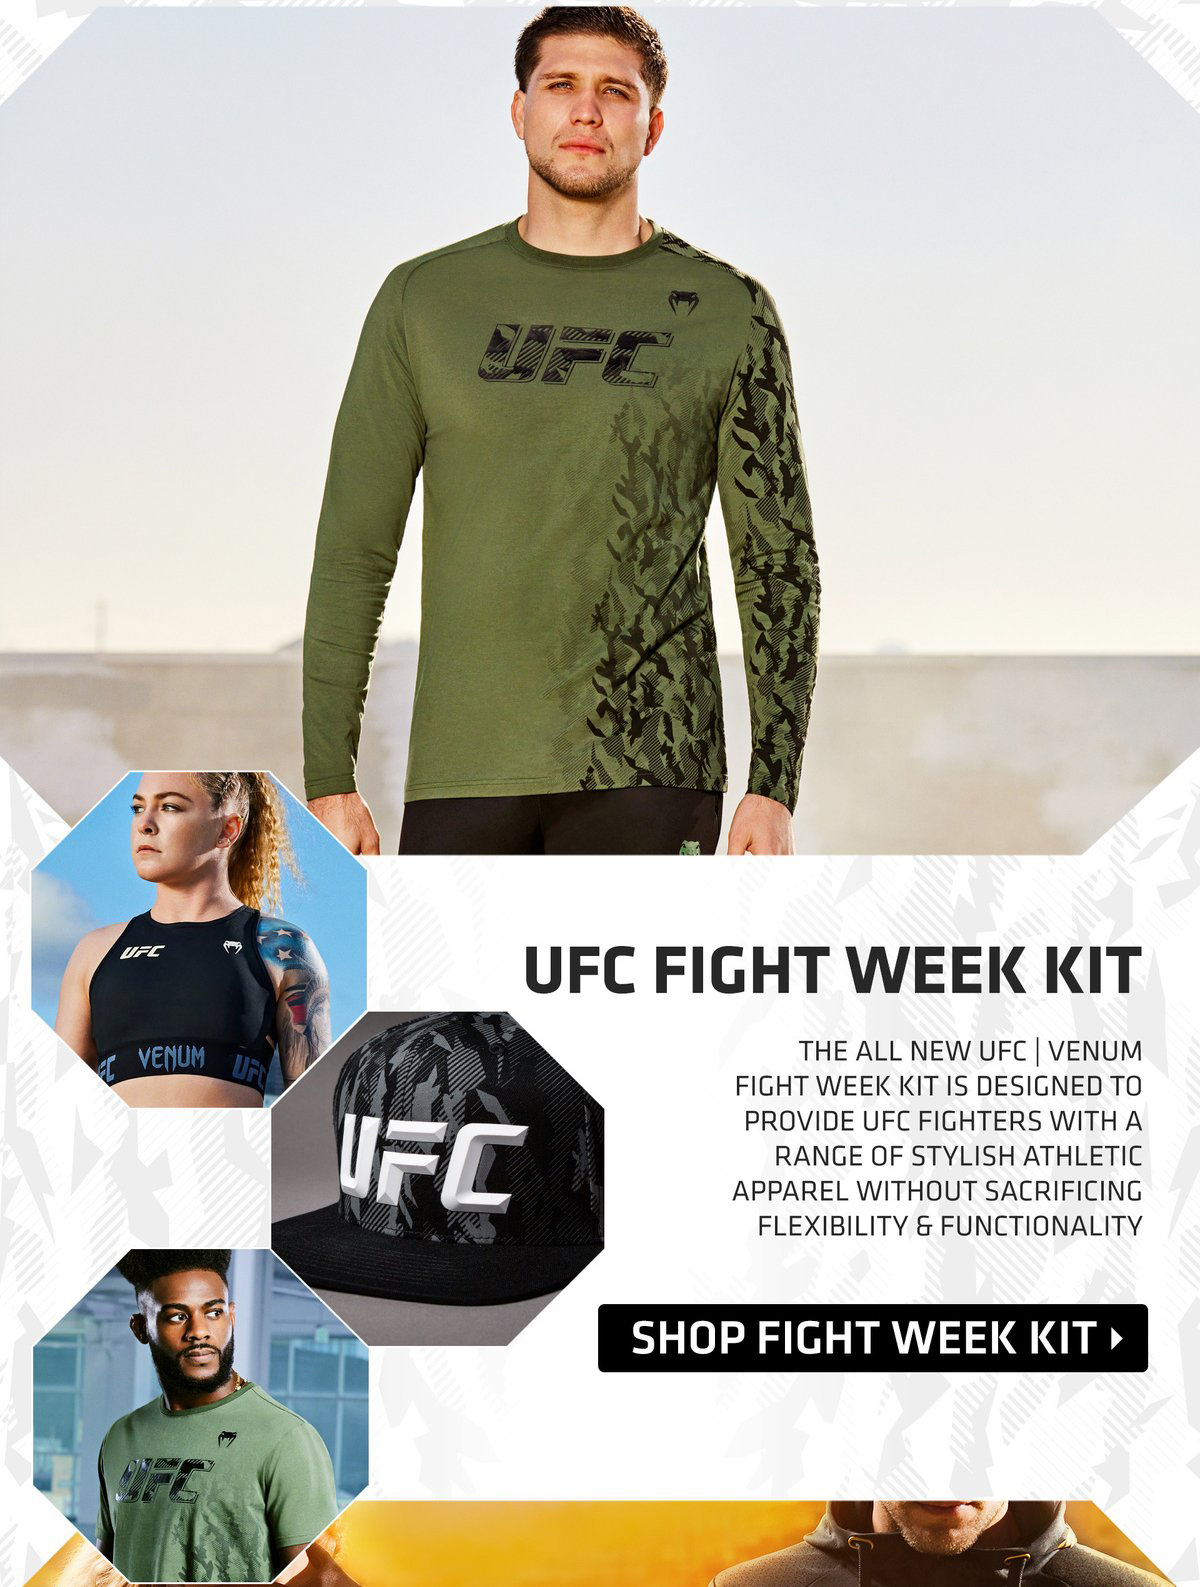 woonadres Stijg oogsten Venum UFC Fight Kit Clothing Now Available